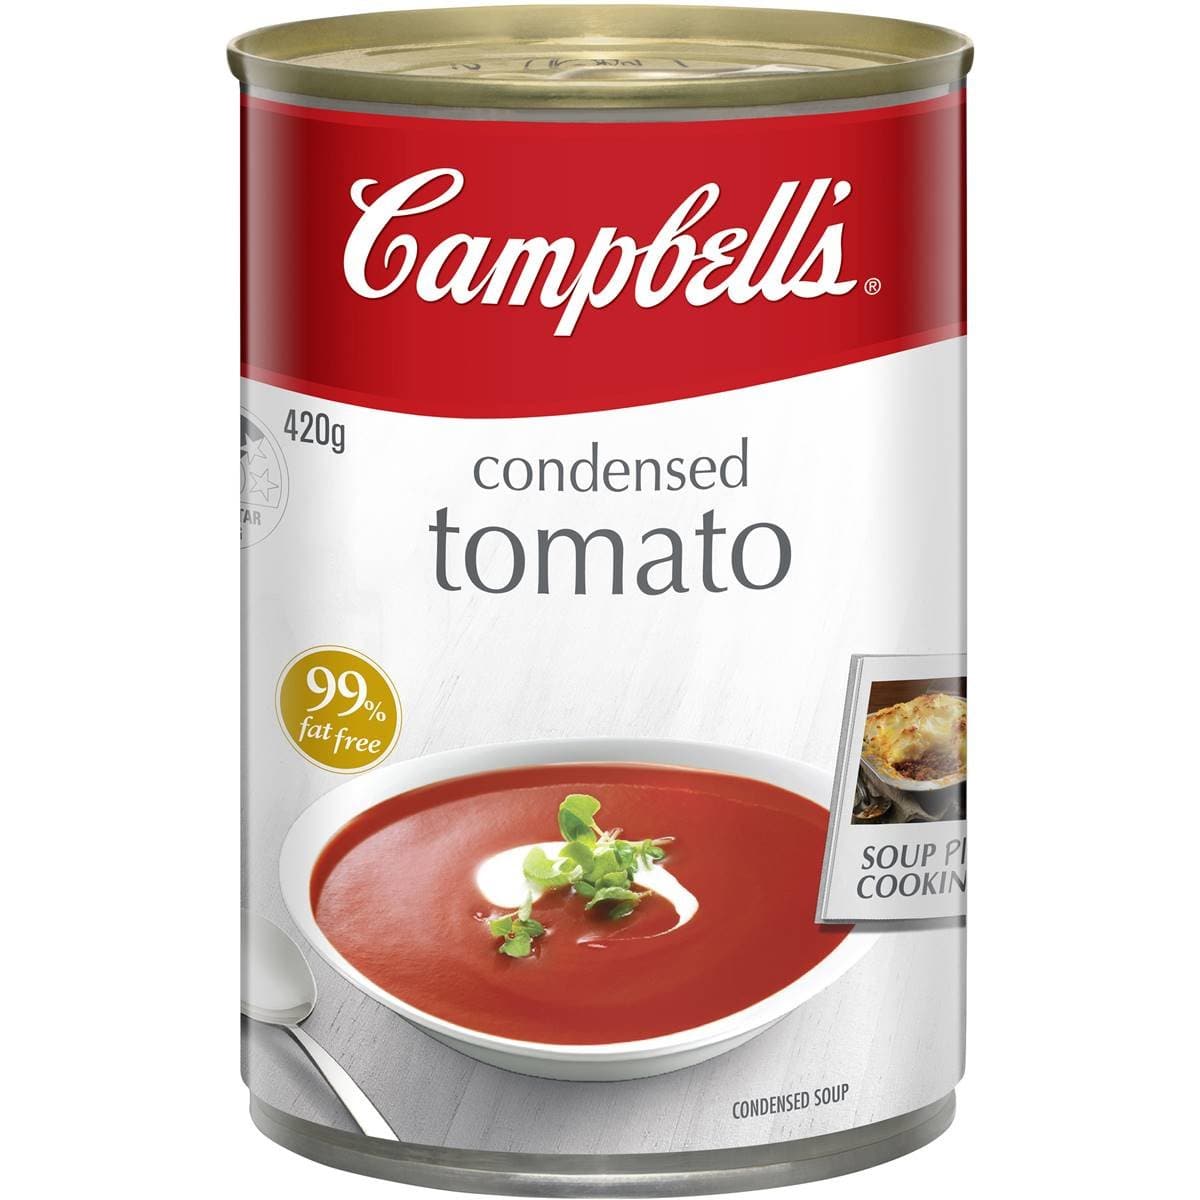 Campbells Soup Condensed Tomato 420g